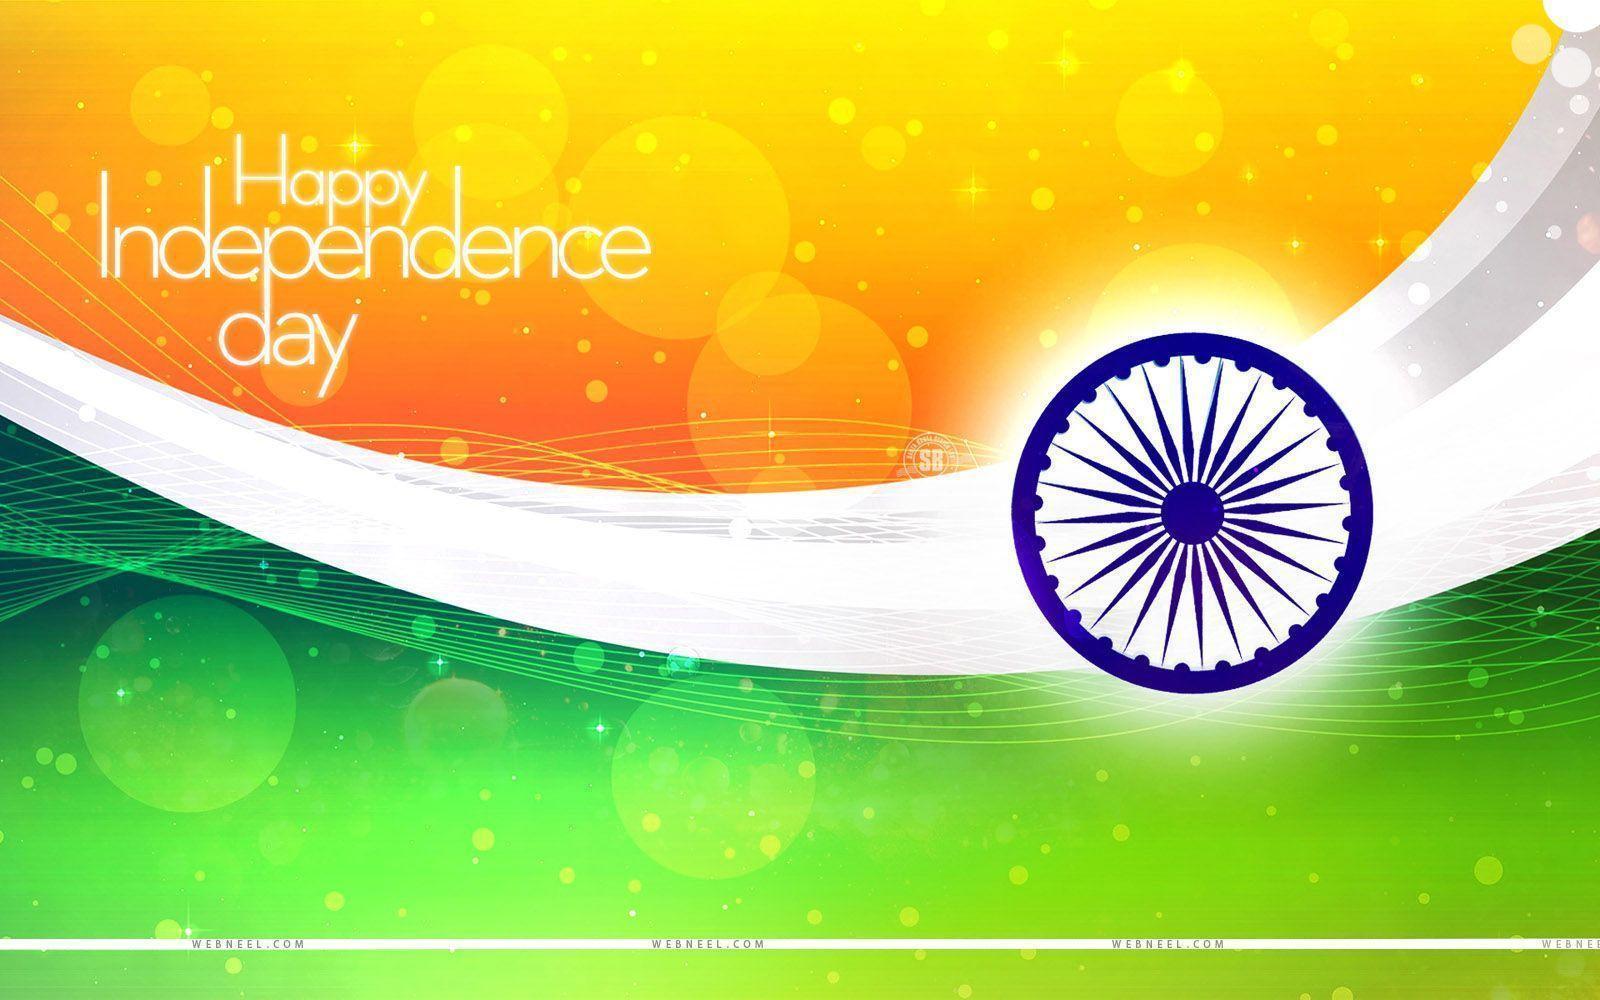 Happy Republic Day 2016 wishes, greetings, Whatsapp Video